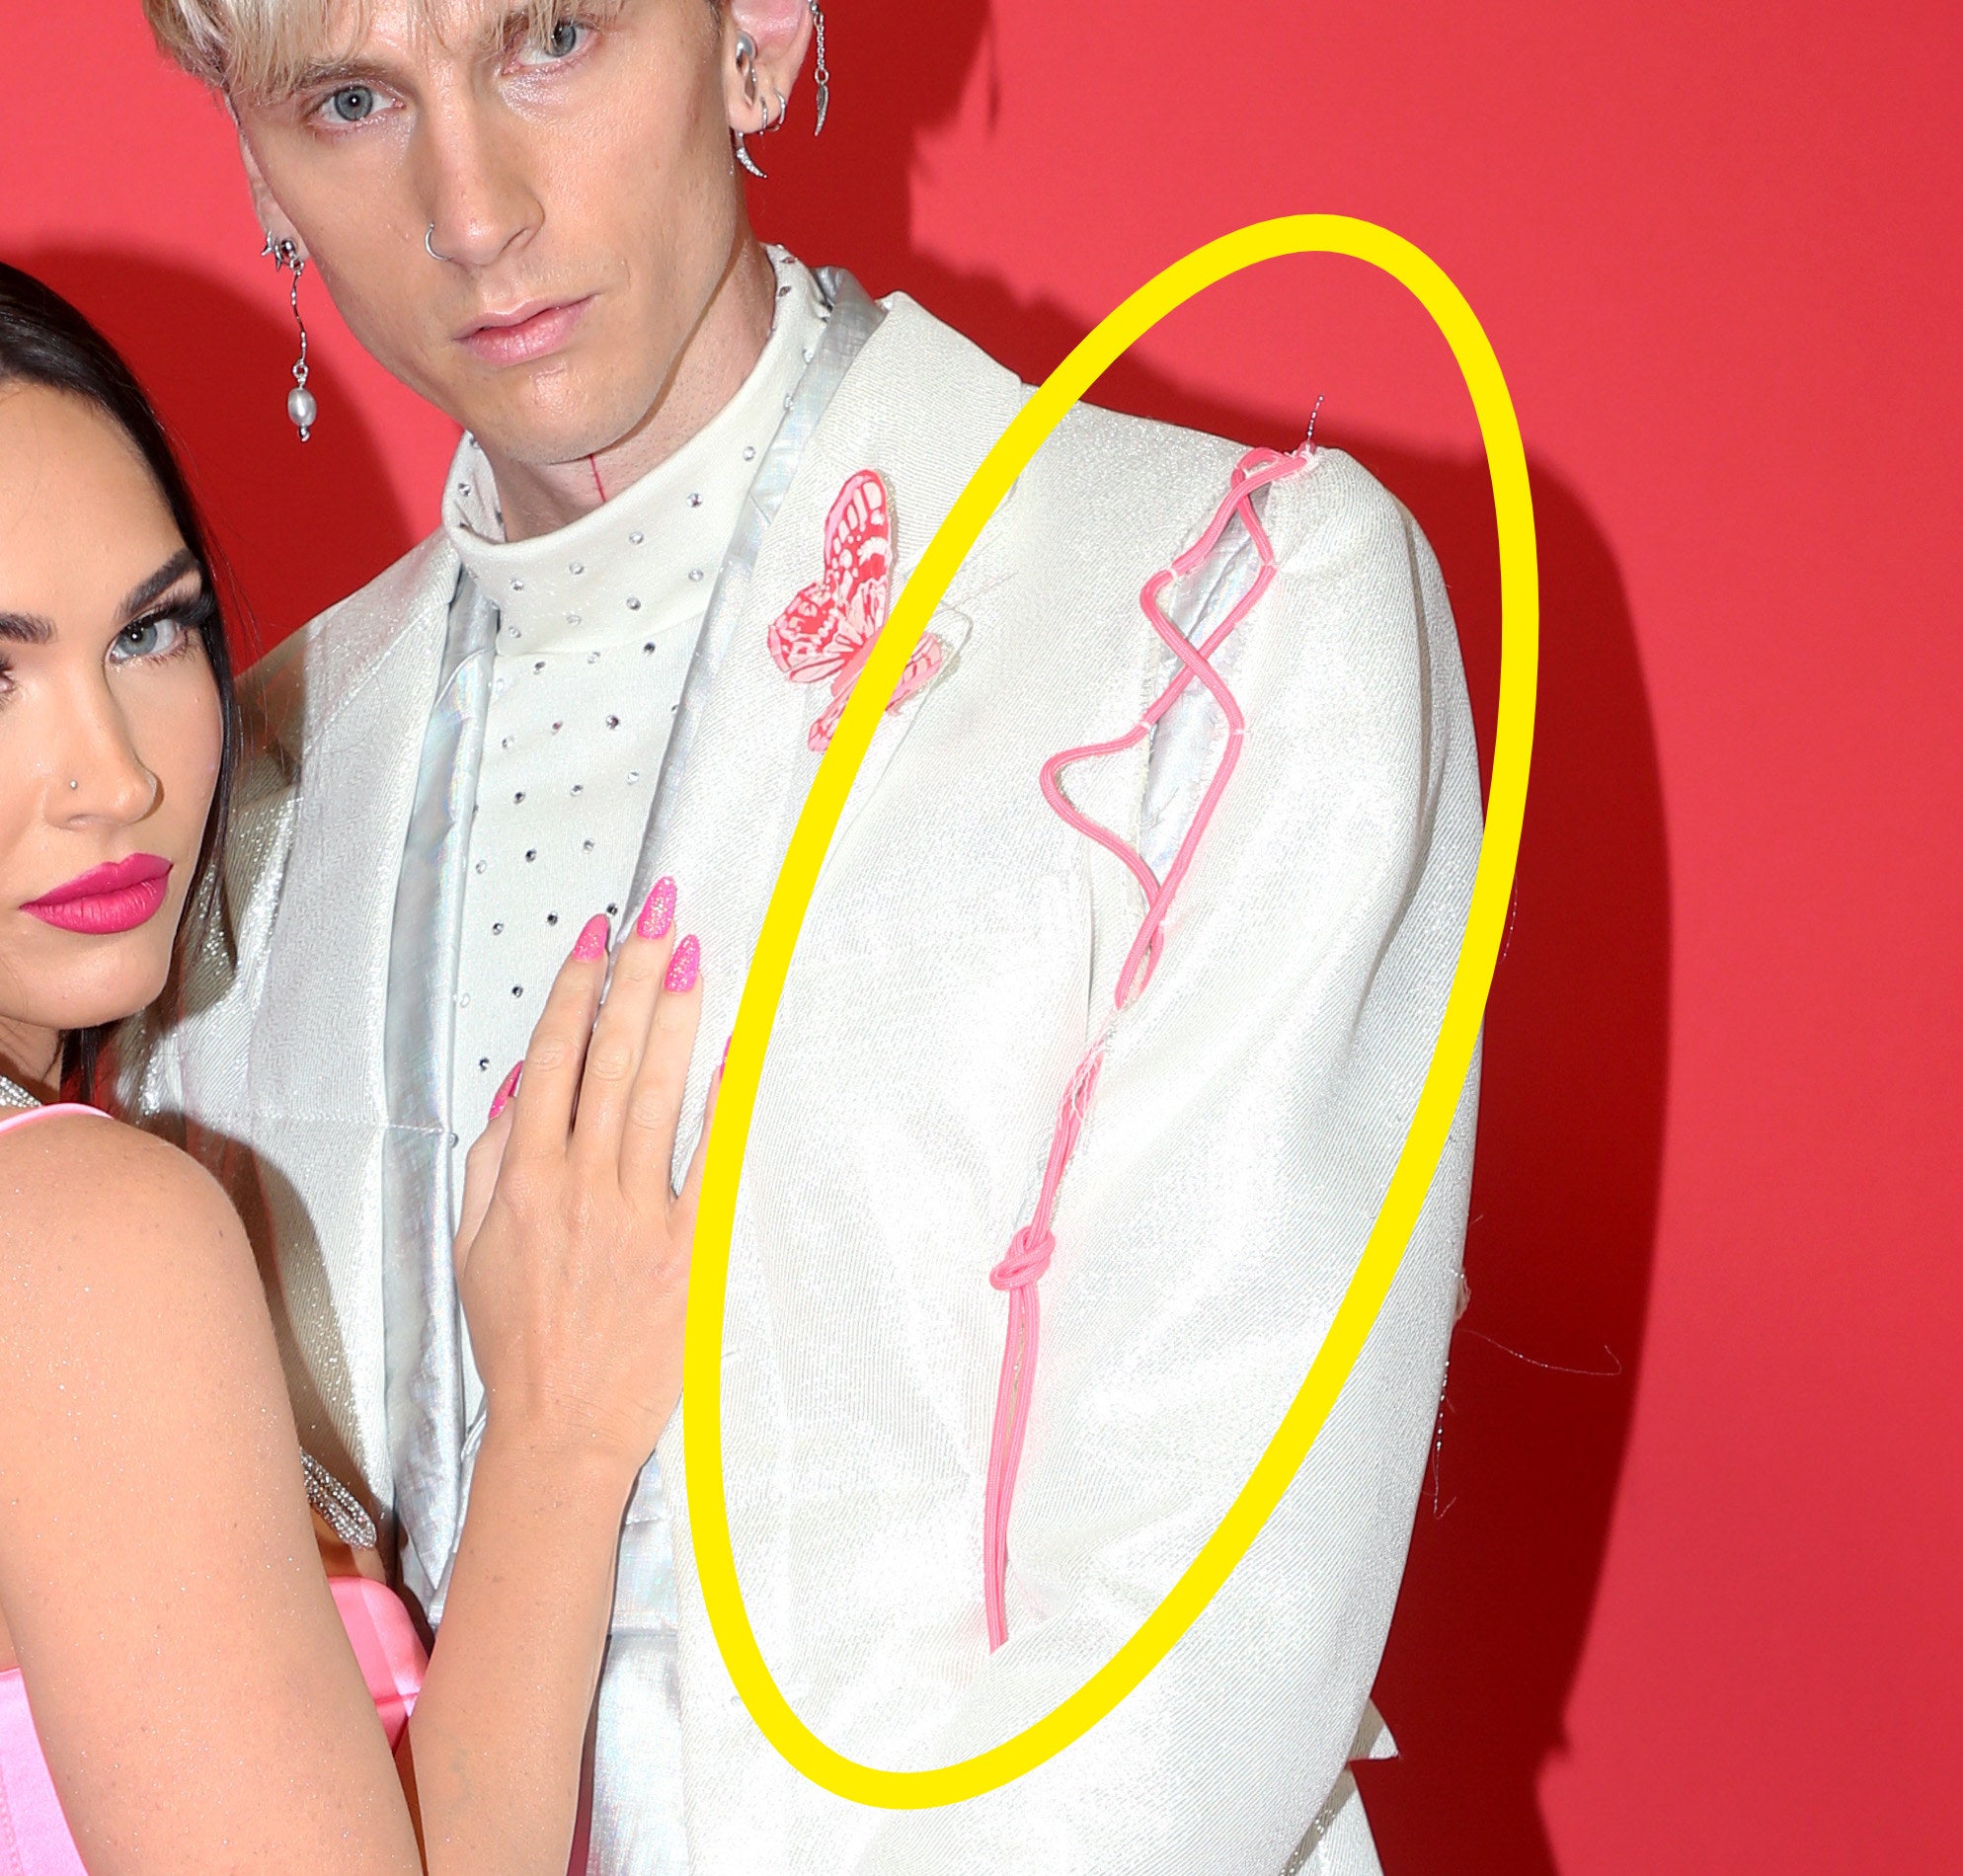 A piece of pink string hangs from the shoulder of his jacket